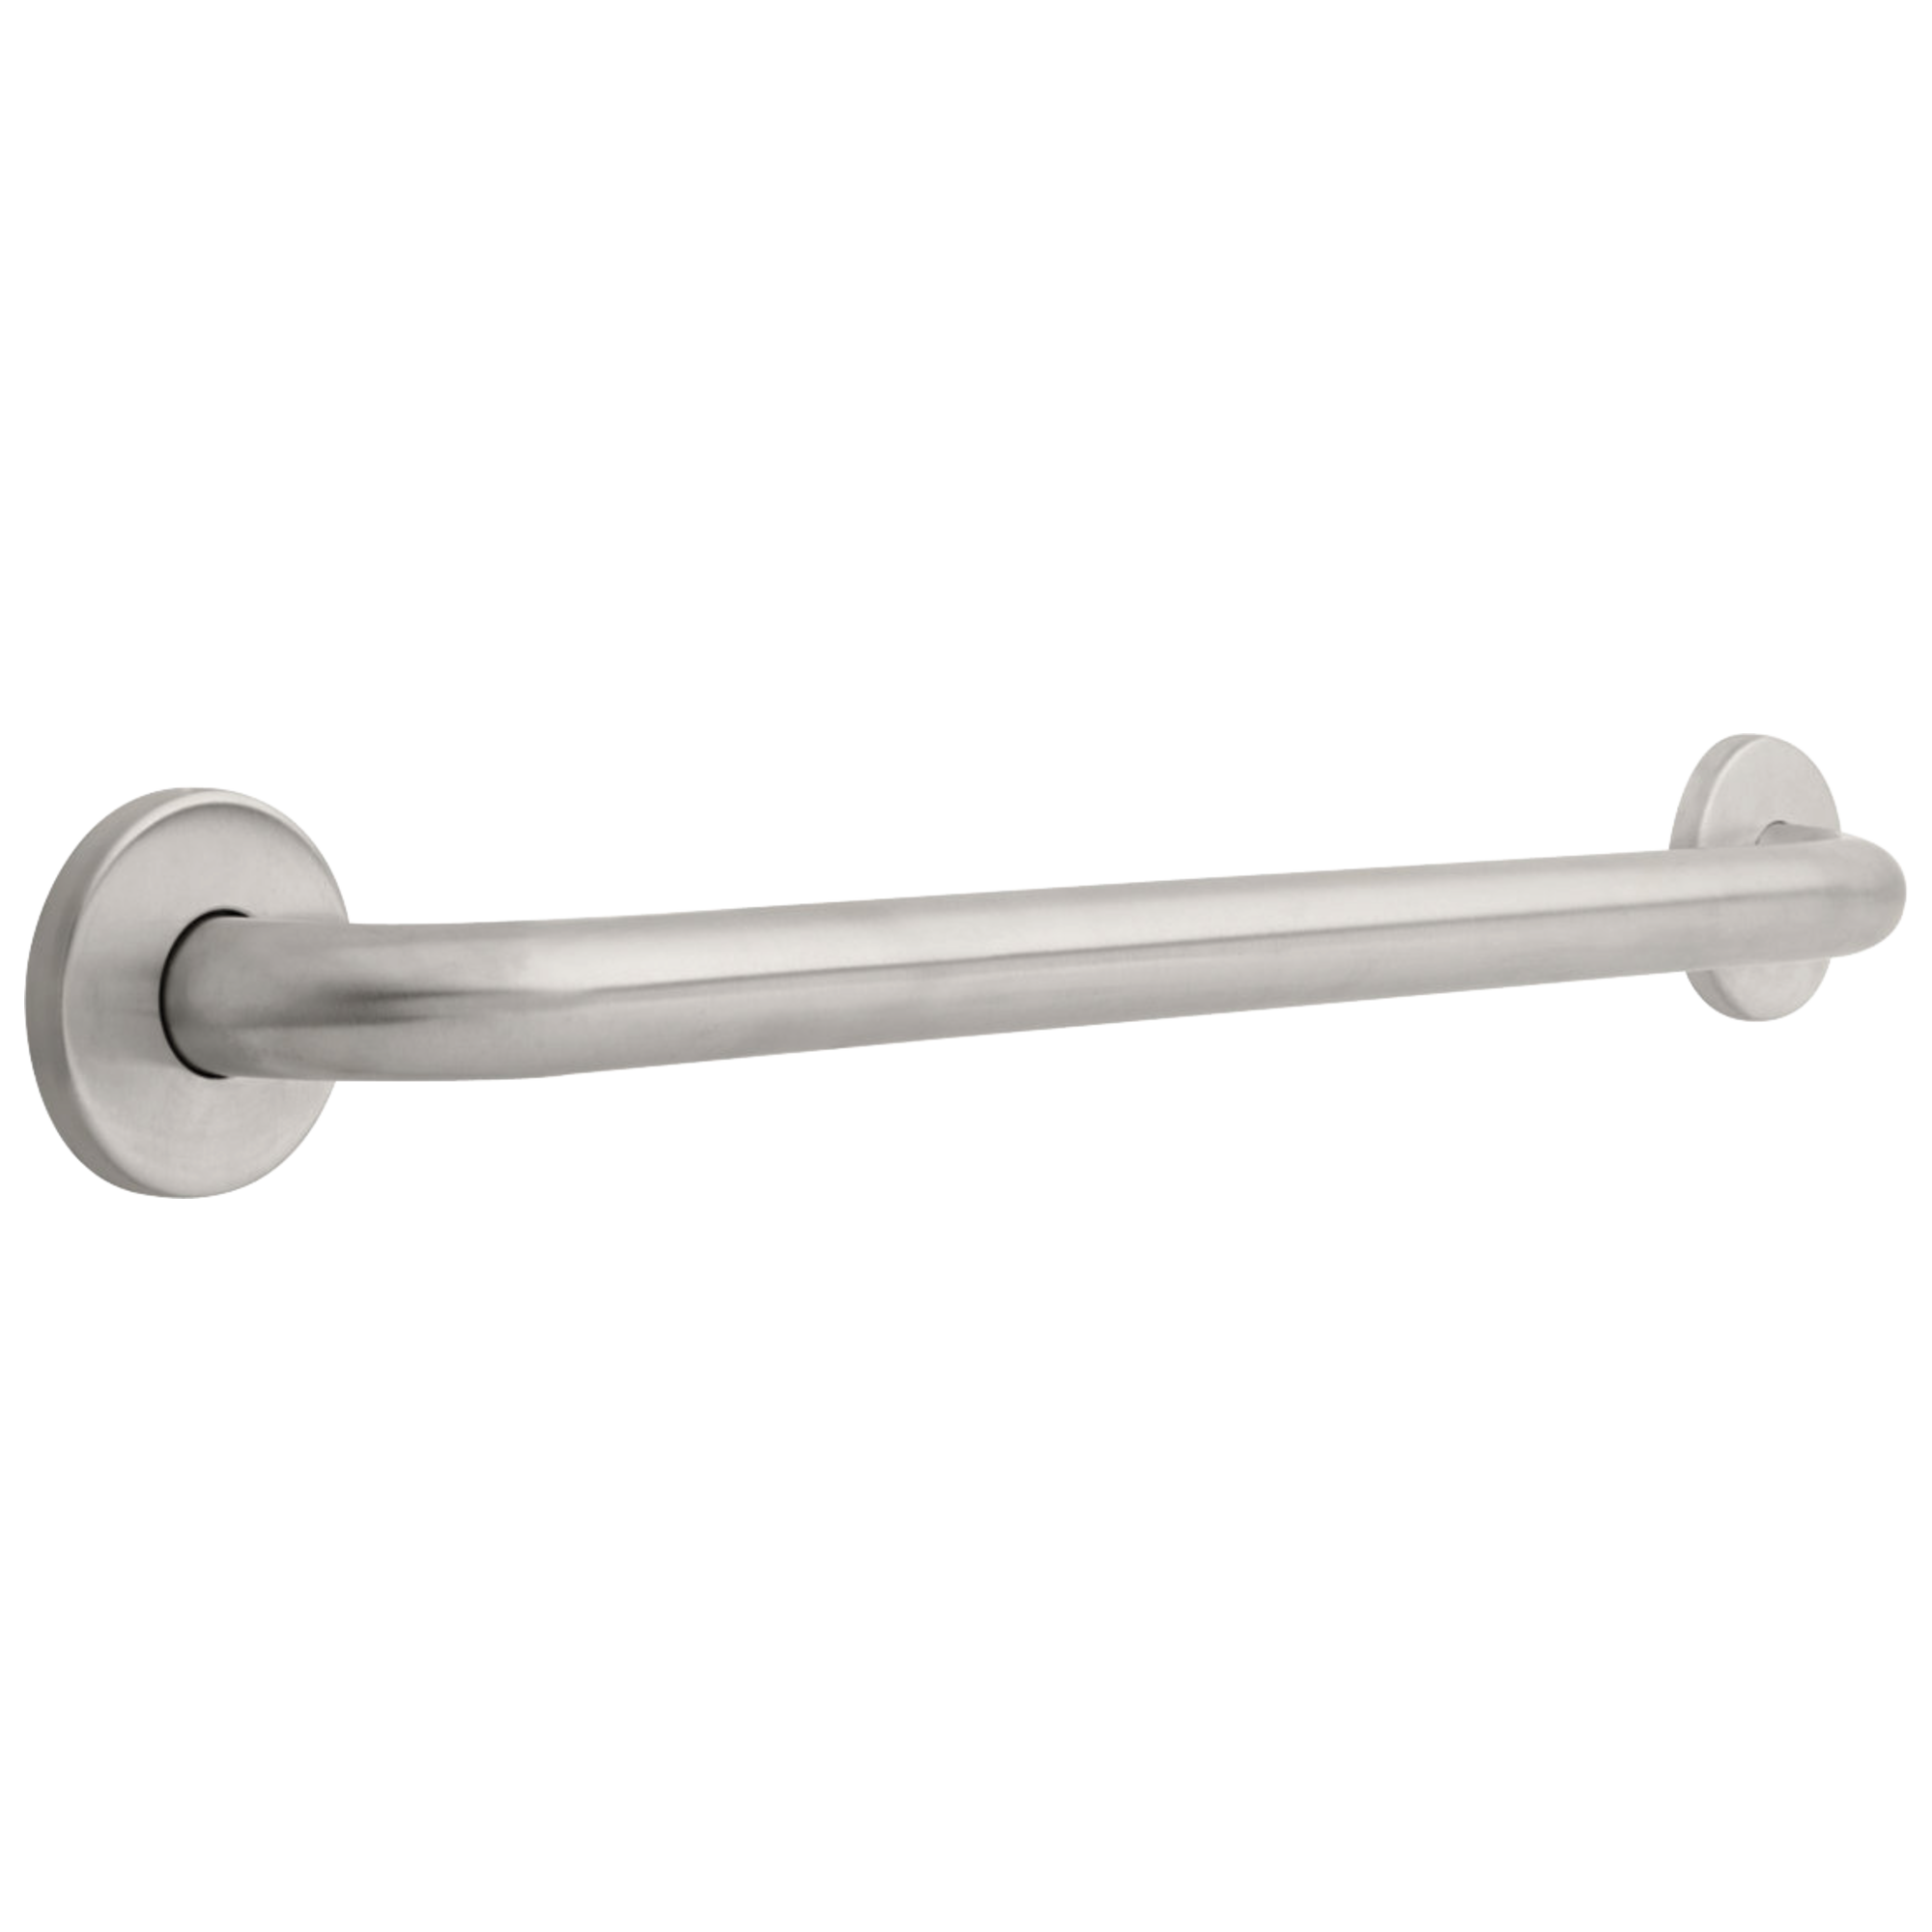 Delta Commercial Other: 1-1/4" x 24" ADA Grab Bar, Concealed Mounting